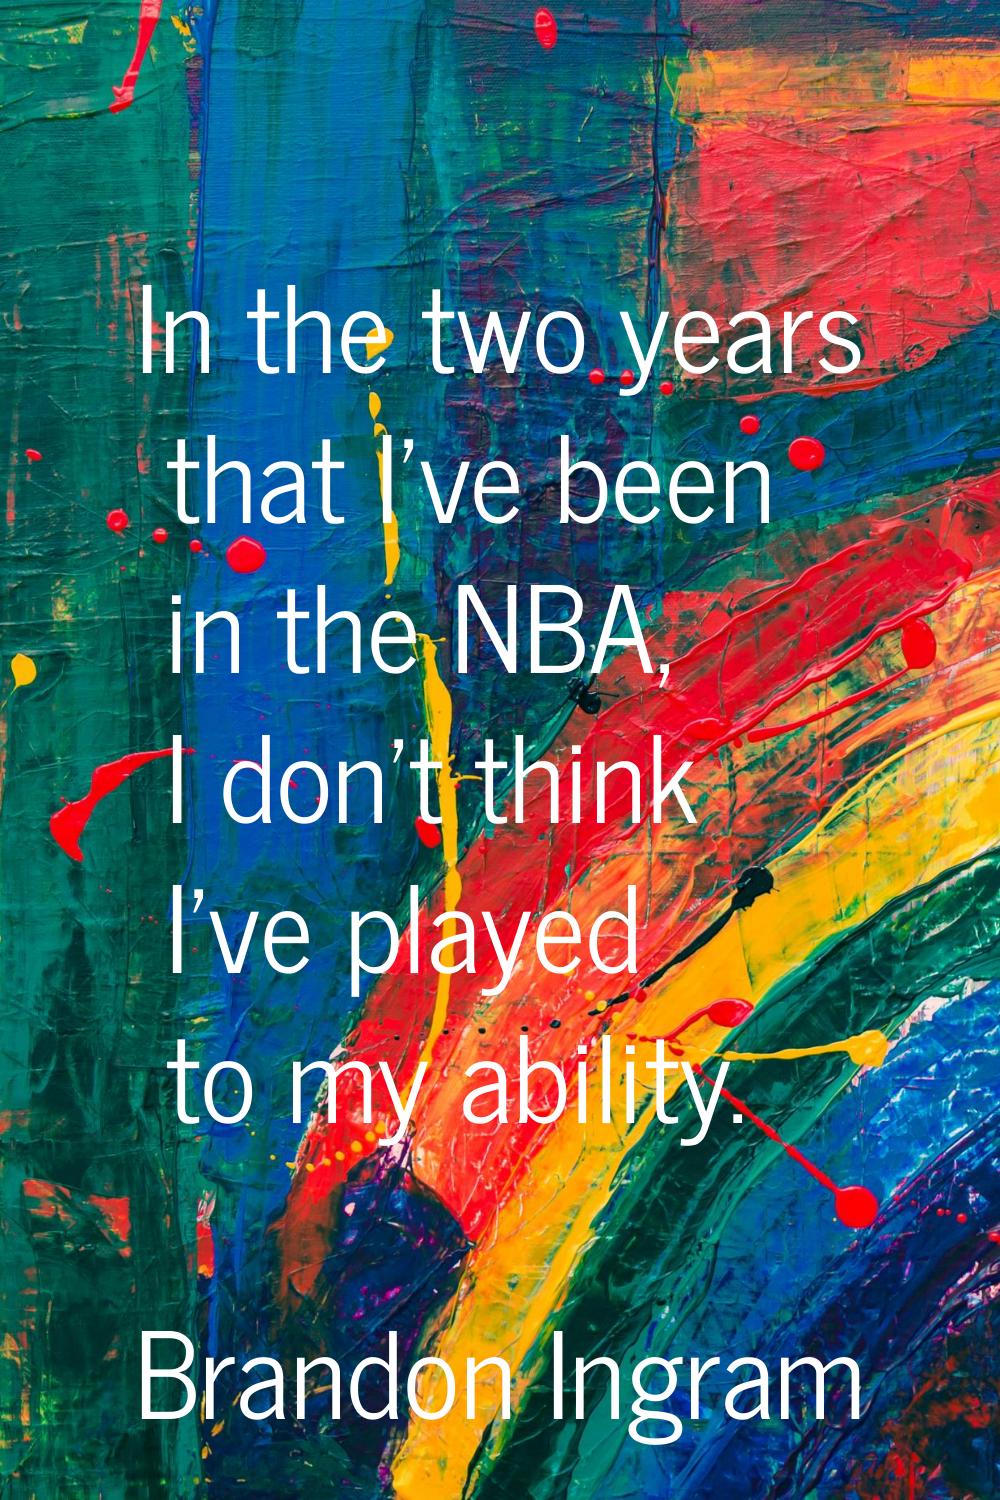 In the two years that I've been in the NBA, I don't think I've played to my ability.